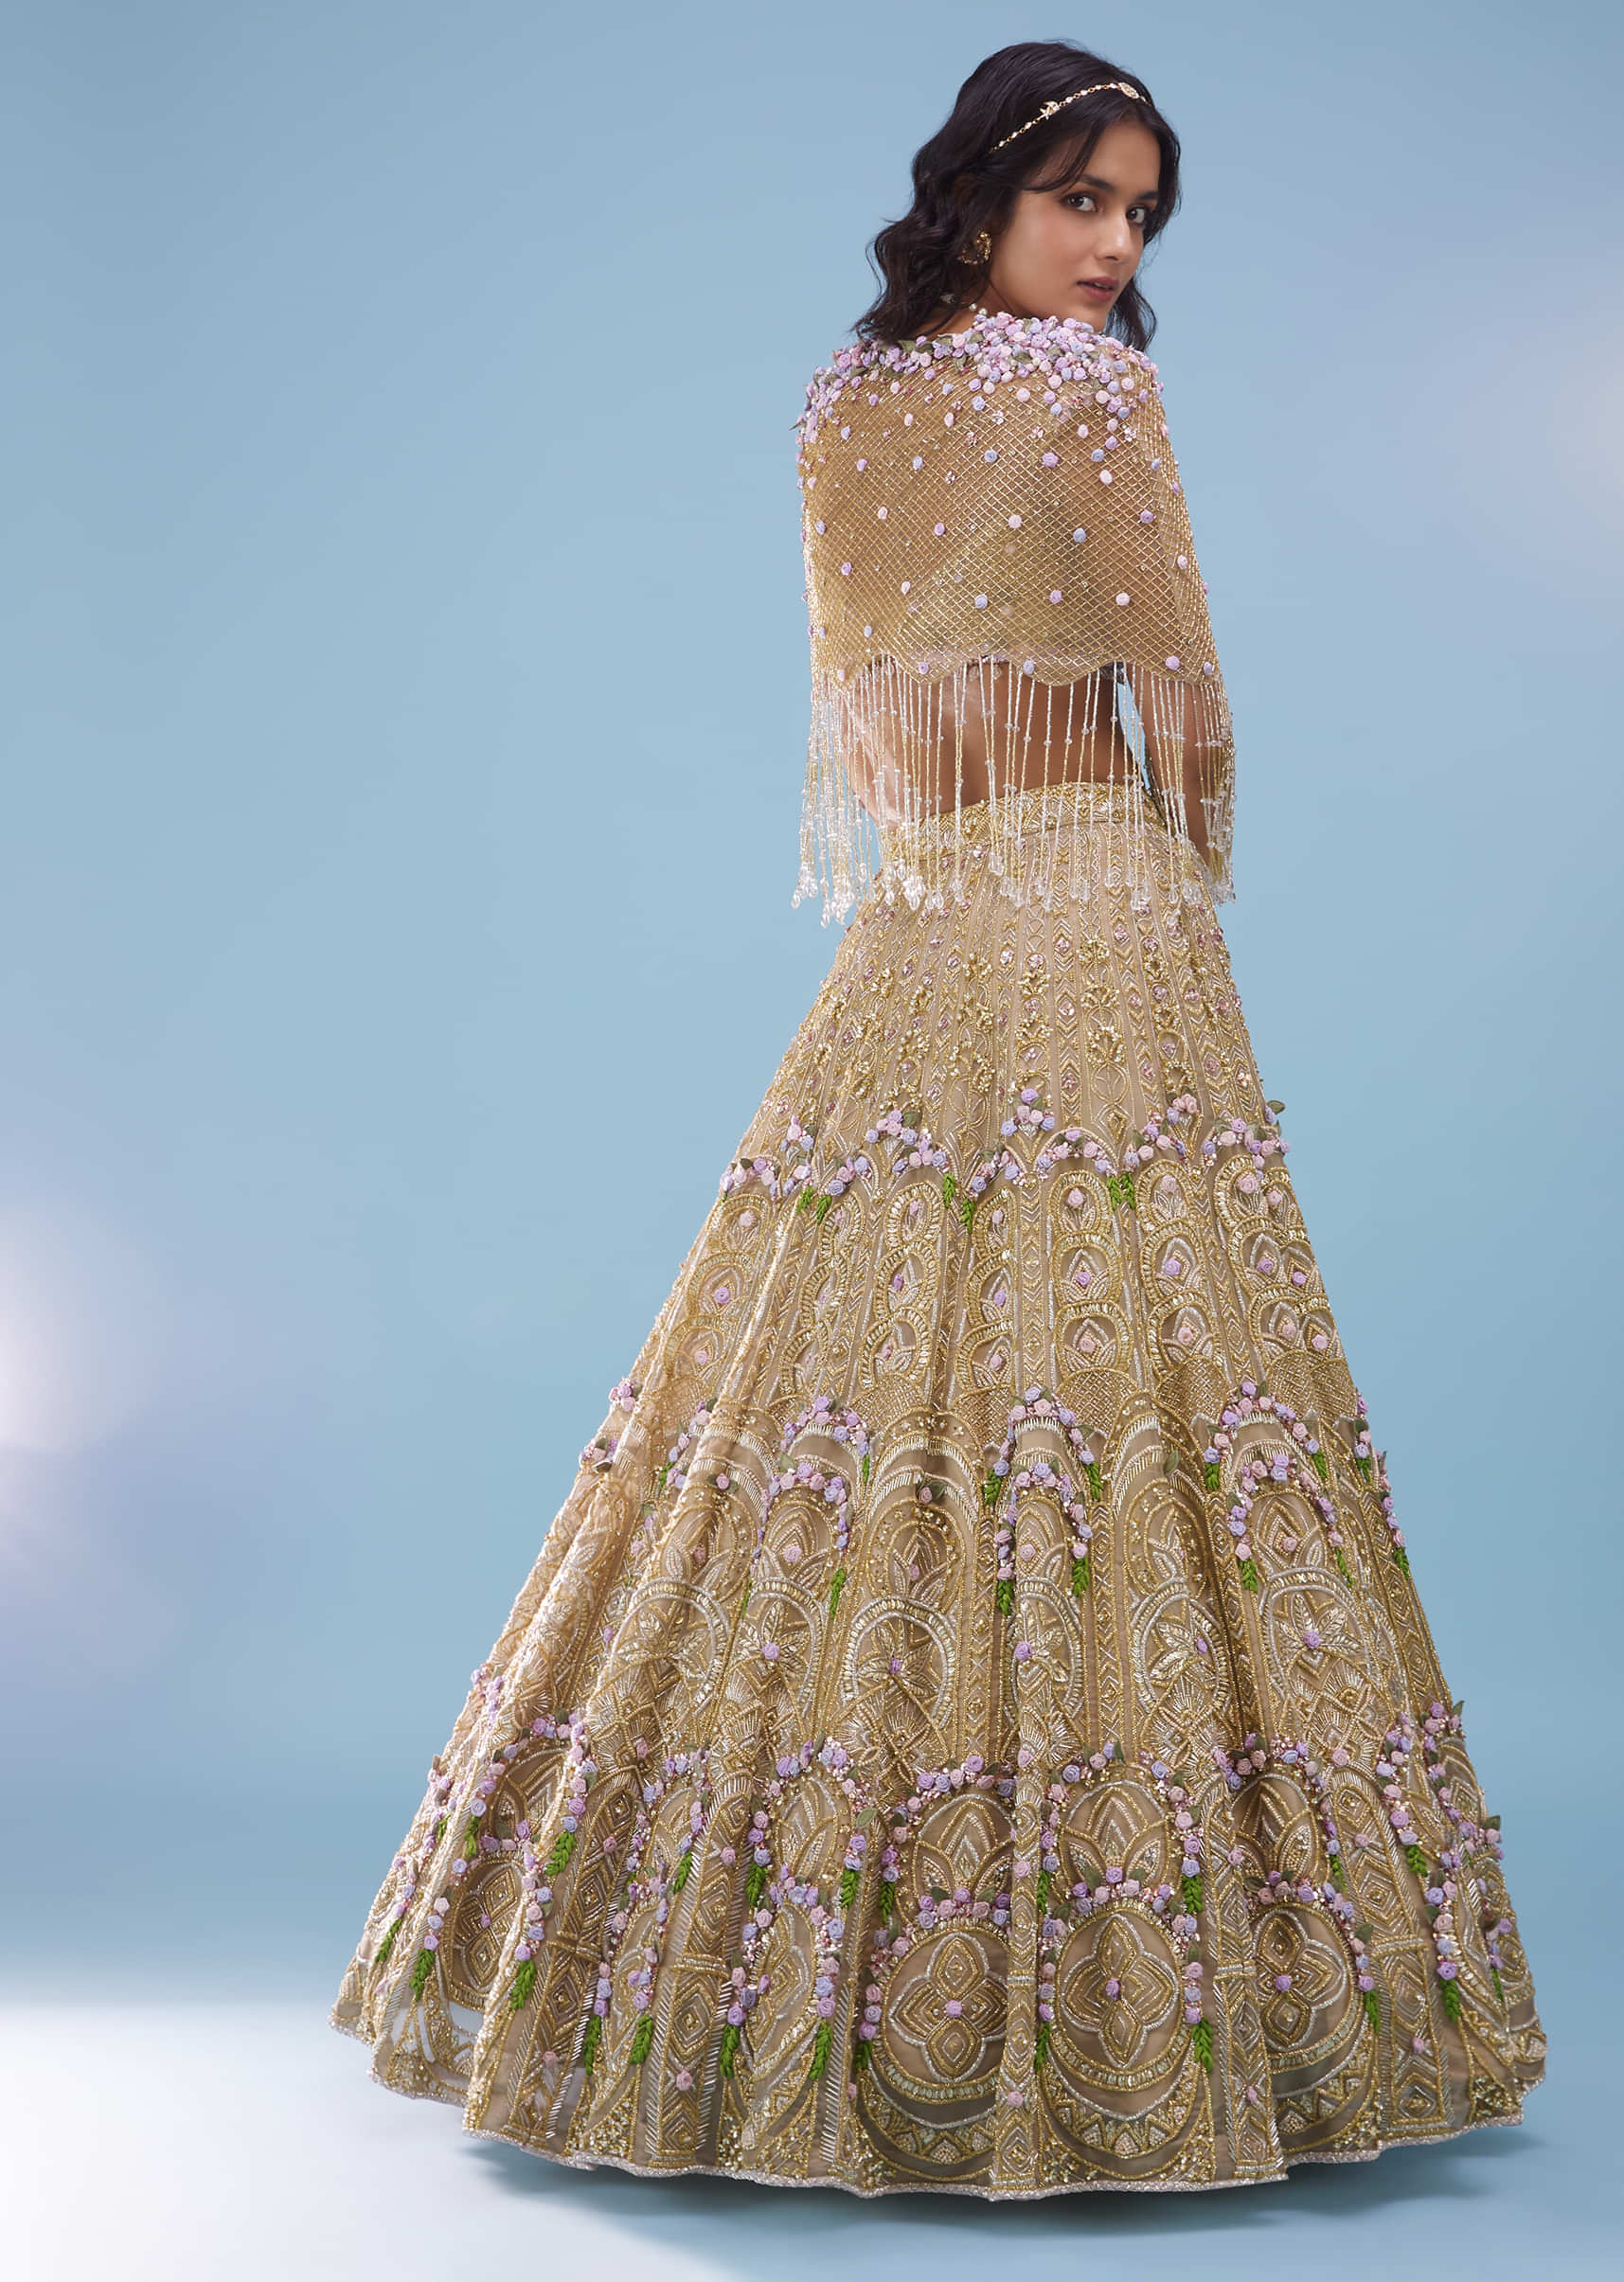 Bridal Naziaa Lehenga In Gold, Embroidered Shoulder Rest, And 3D Floral Embroidery - NOOR 2022